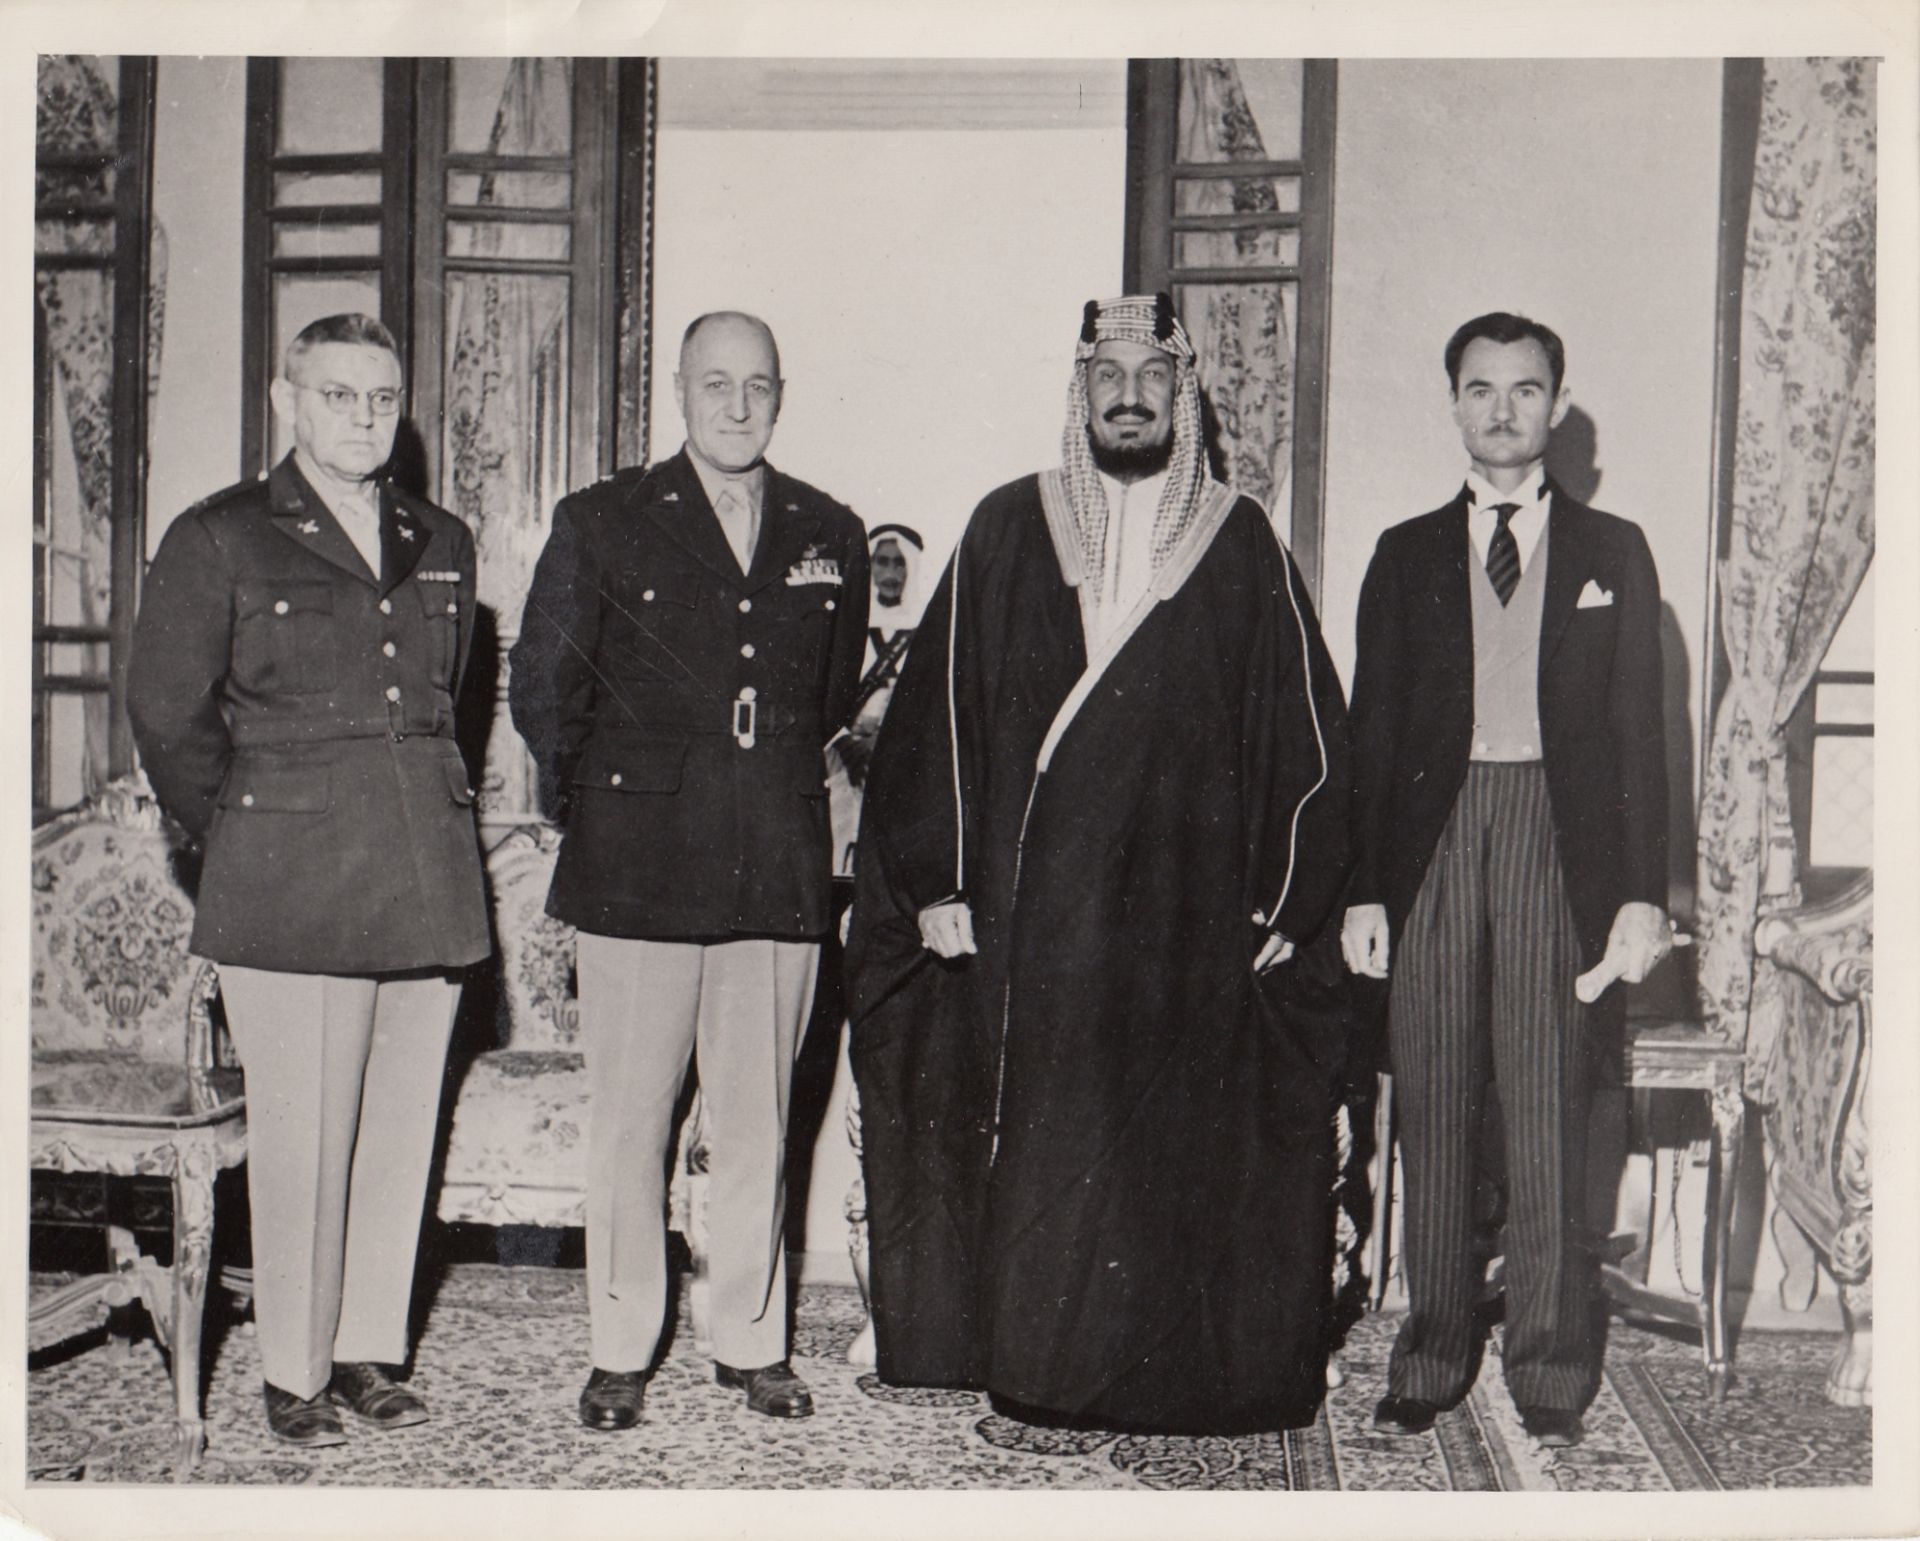 FIVE RARE PHOTOGRAPHS OF KING ABDUL AL-AZIZ AL SAUD DURING HIS REALM, PROBABLY 1930-1940 - Image 3 of 10